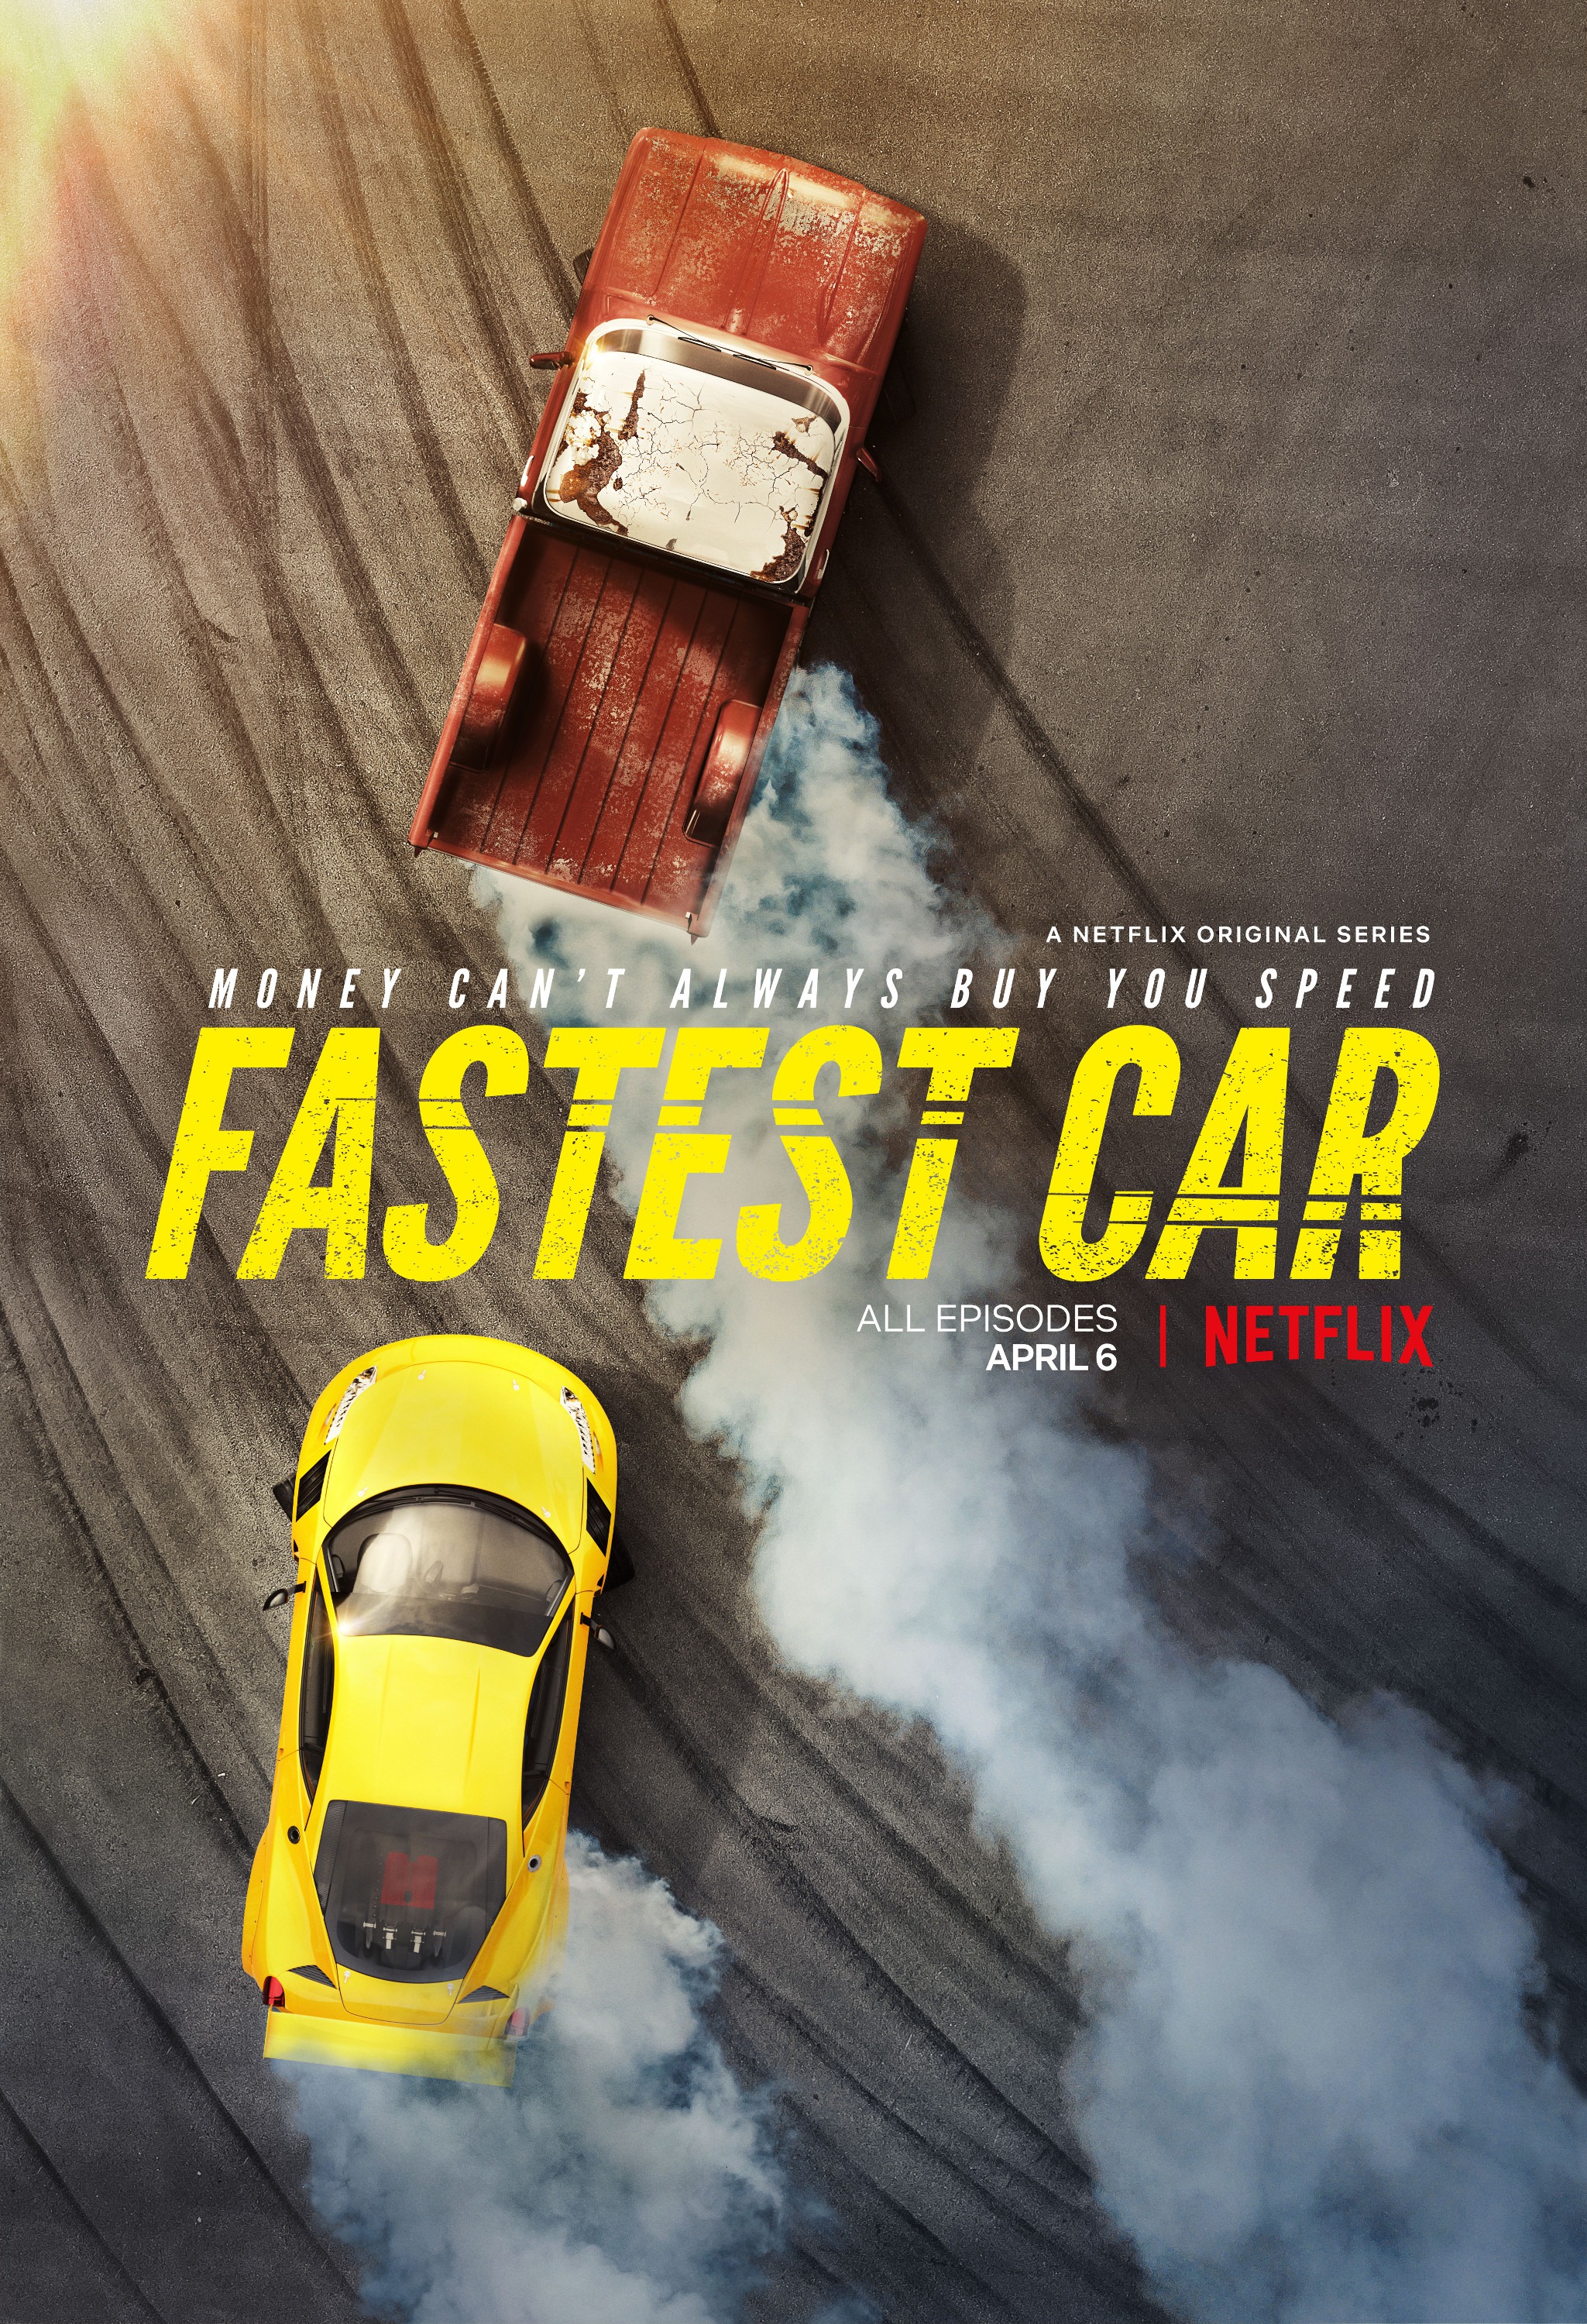 Fastest Car Reviews + Where to Watch Tv show Online, Stream or Skip?